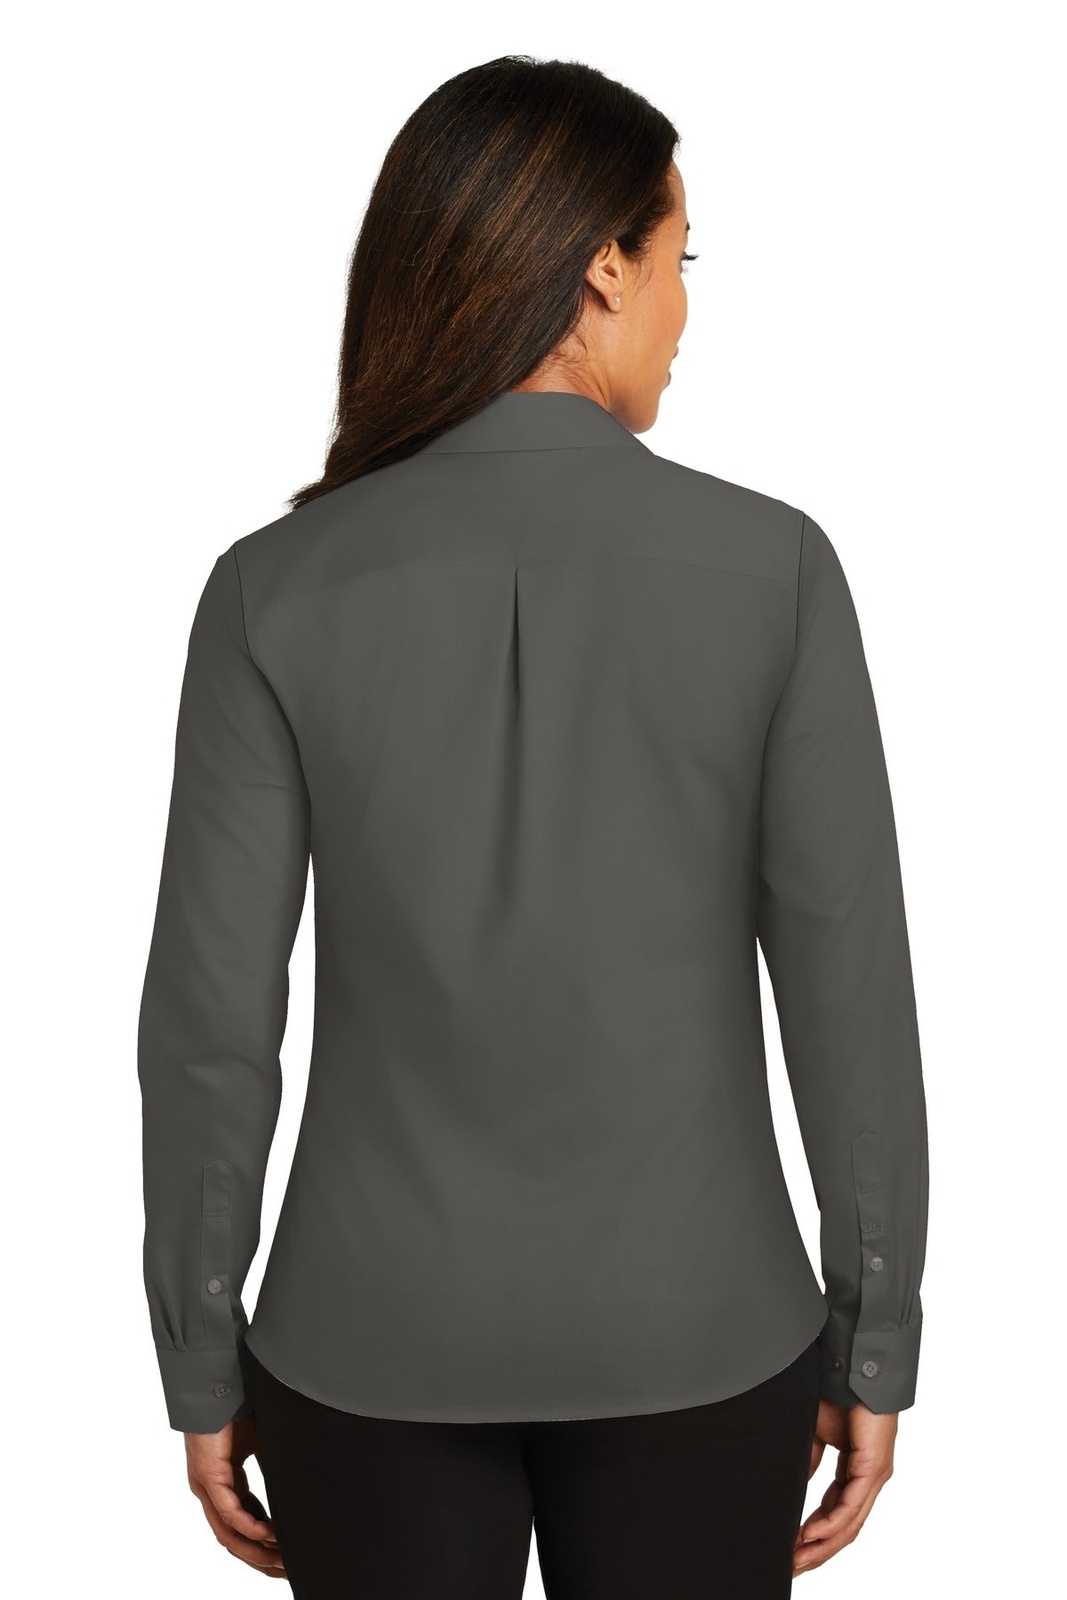 Red House RH79 Ladies Non-Iron Twill Shirt - Gray Steel - HIT a Double - 2